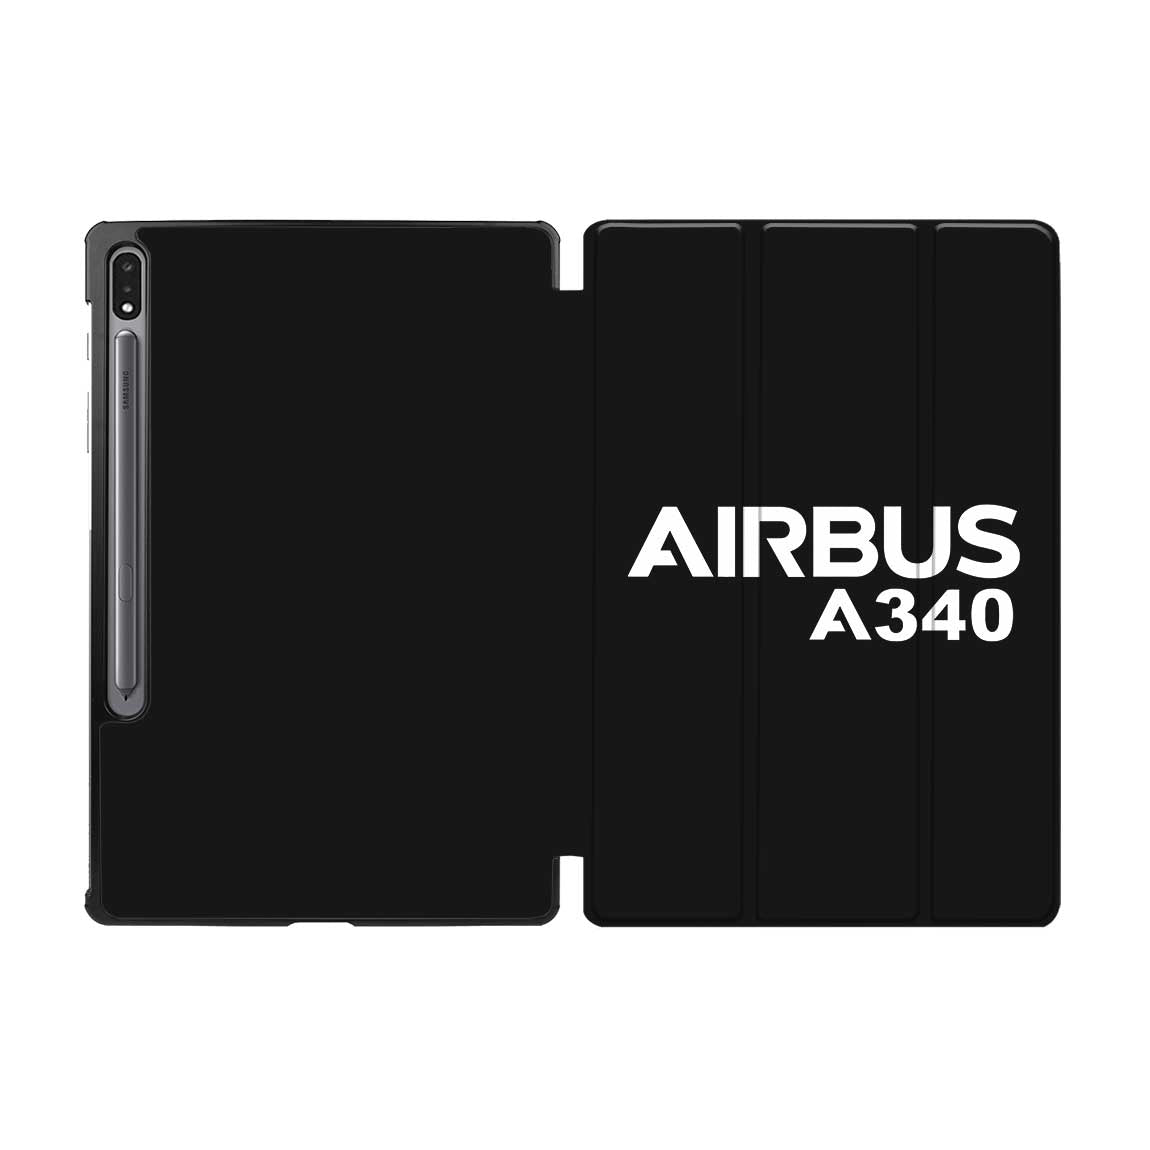 Airbus A340 & Text Designed Samsung Tablet Cases